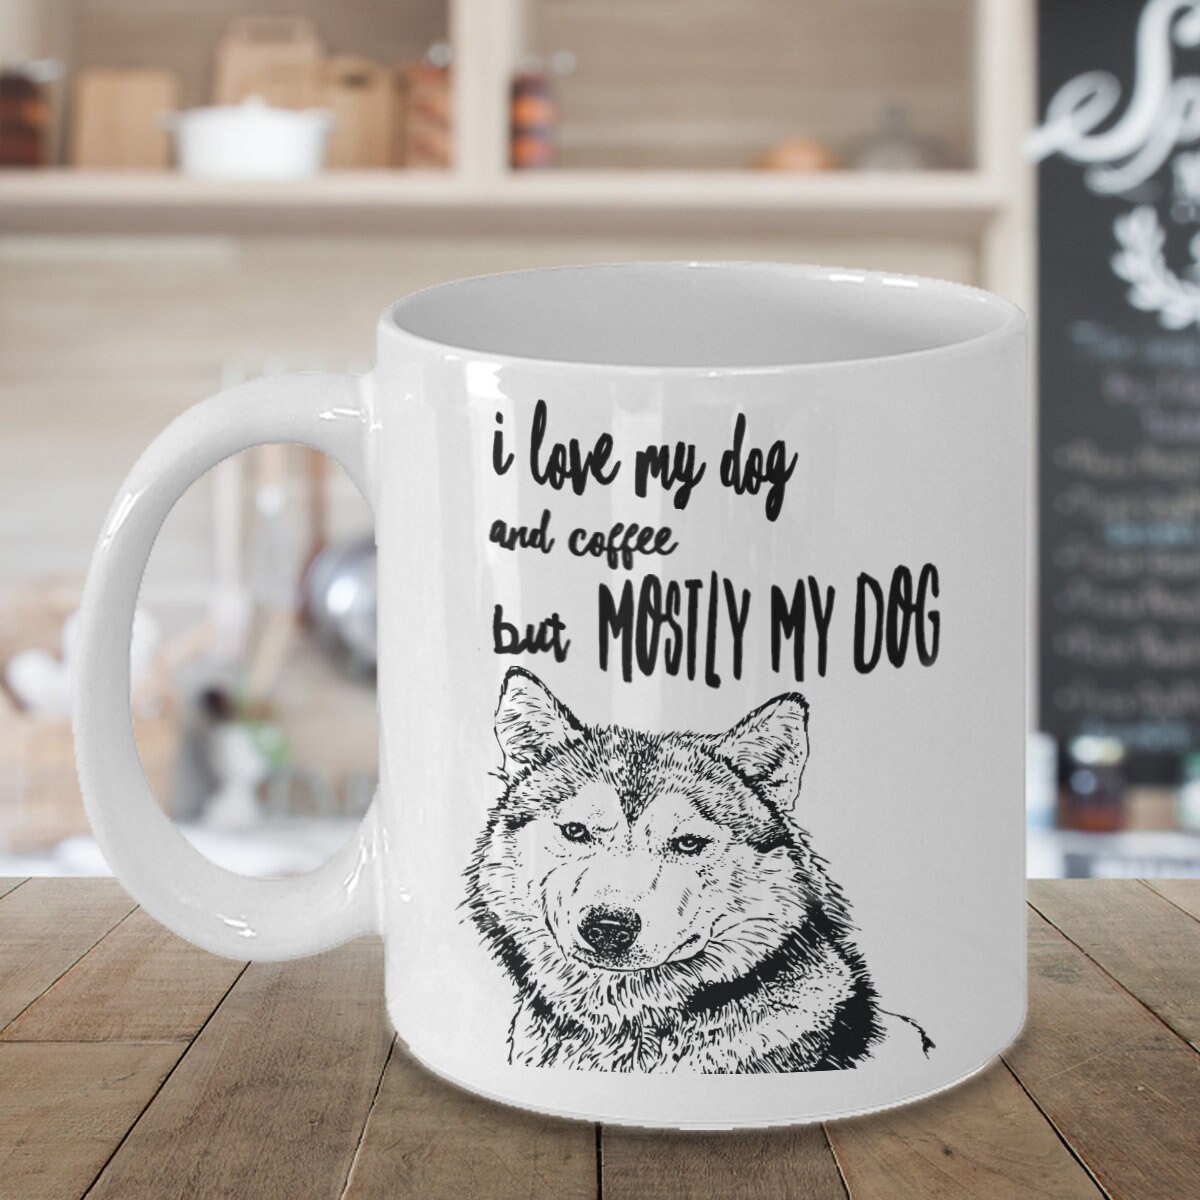 I Love My Dog And Coffee But Mostly My Dog/Coffee | Etsy